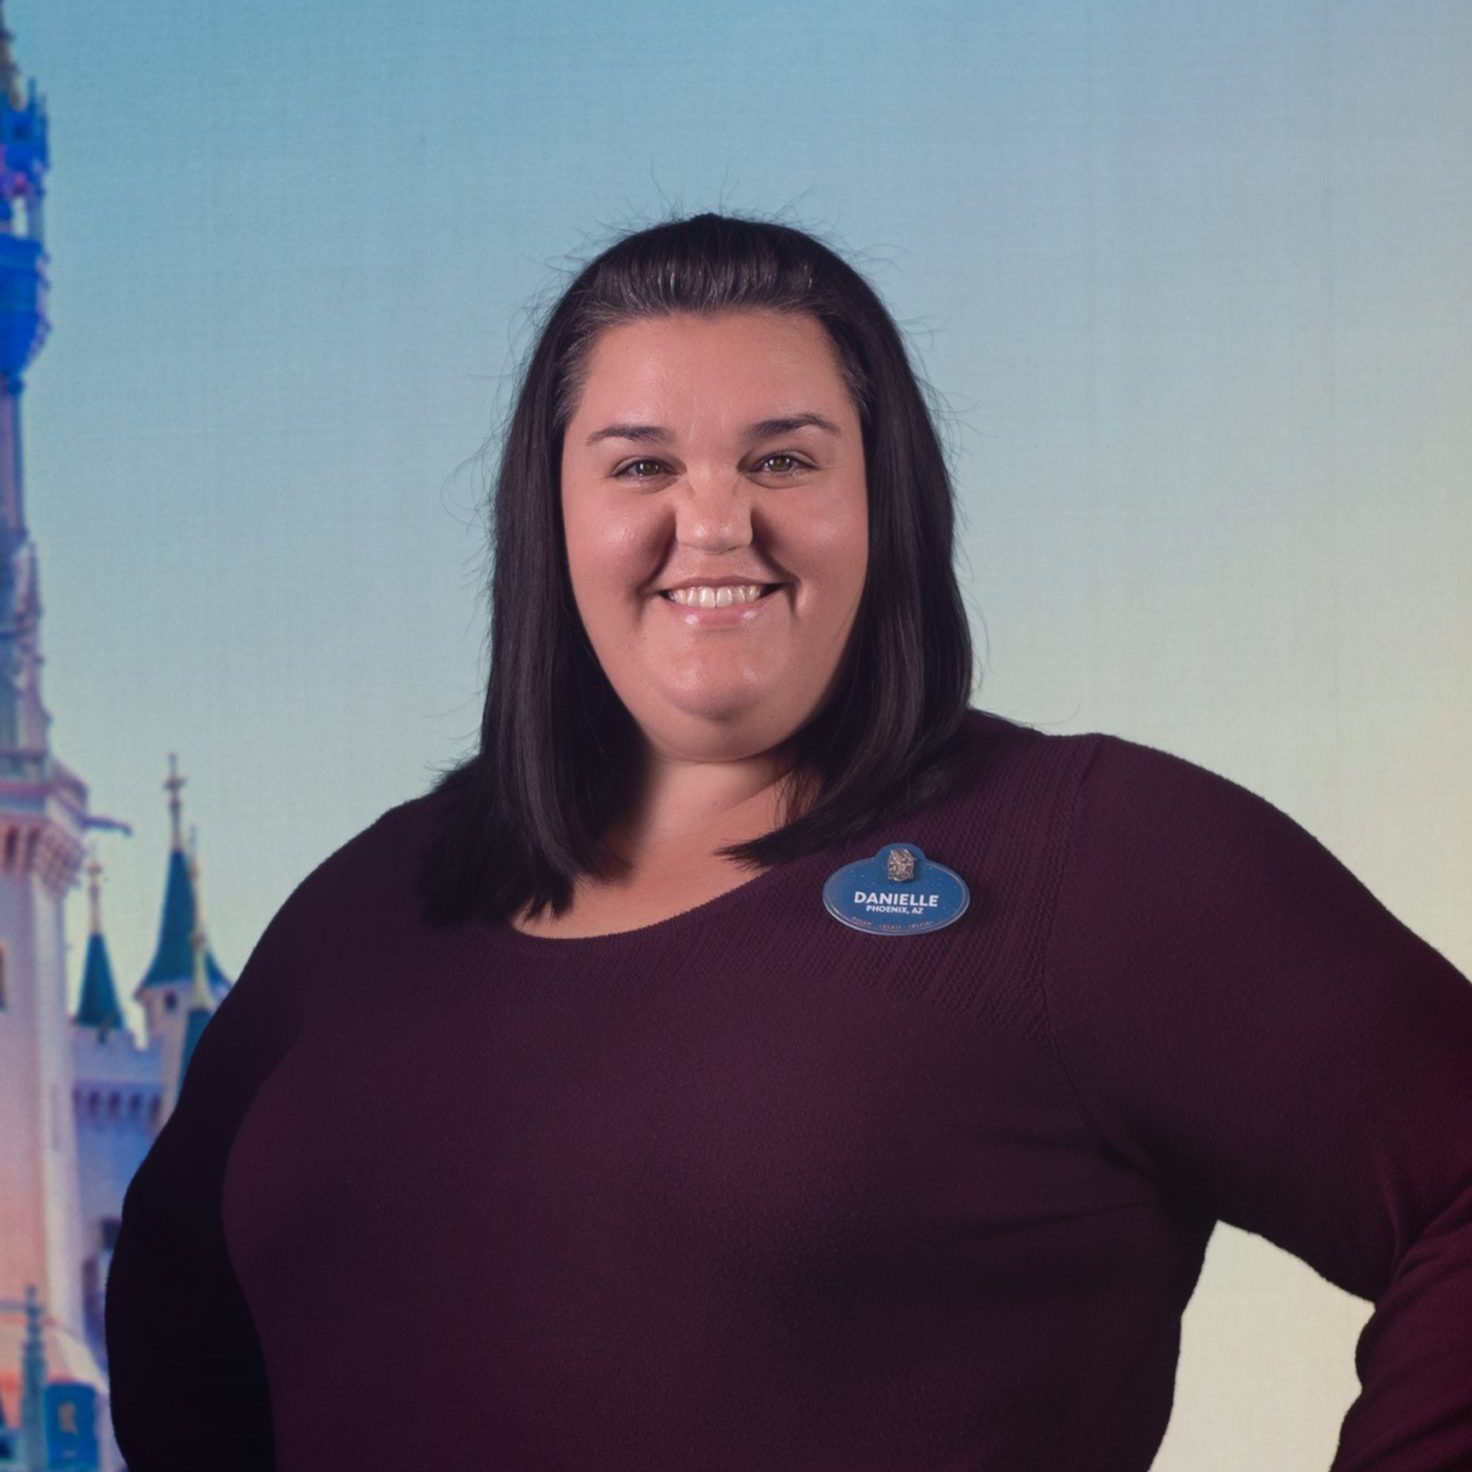 Disney DPEP Tech employee Danielle wearing a burgundy sweater and smiling in front of Cindere;;a's Castle at Walt Disney World